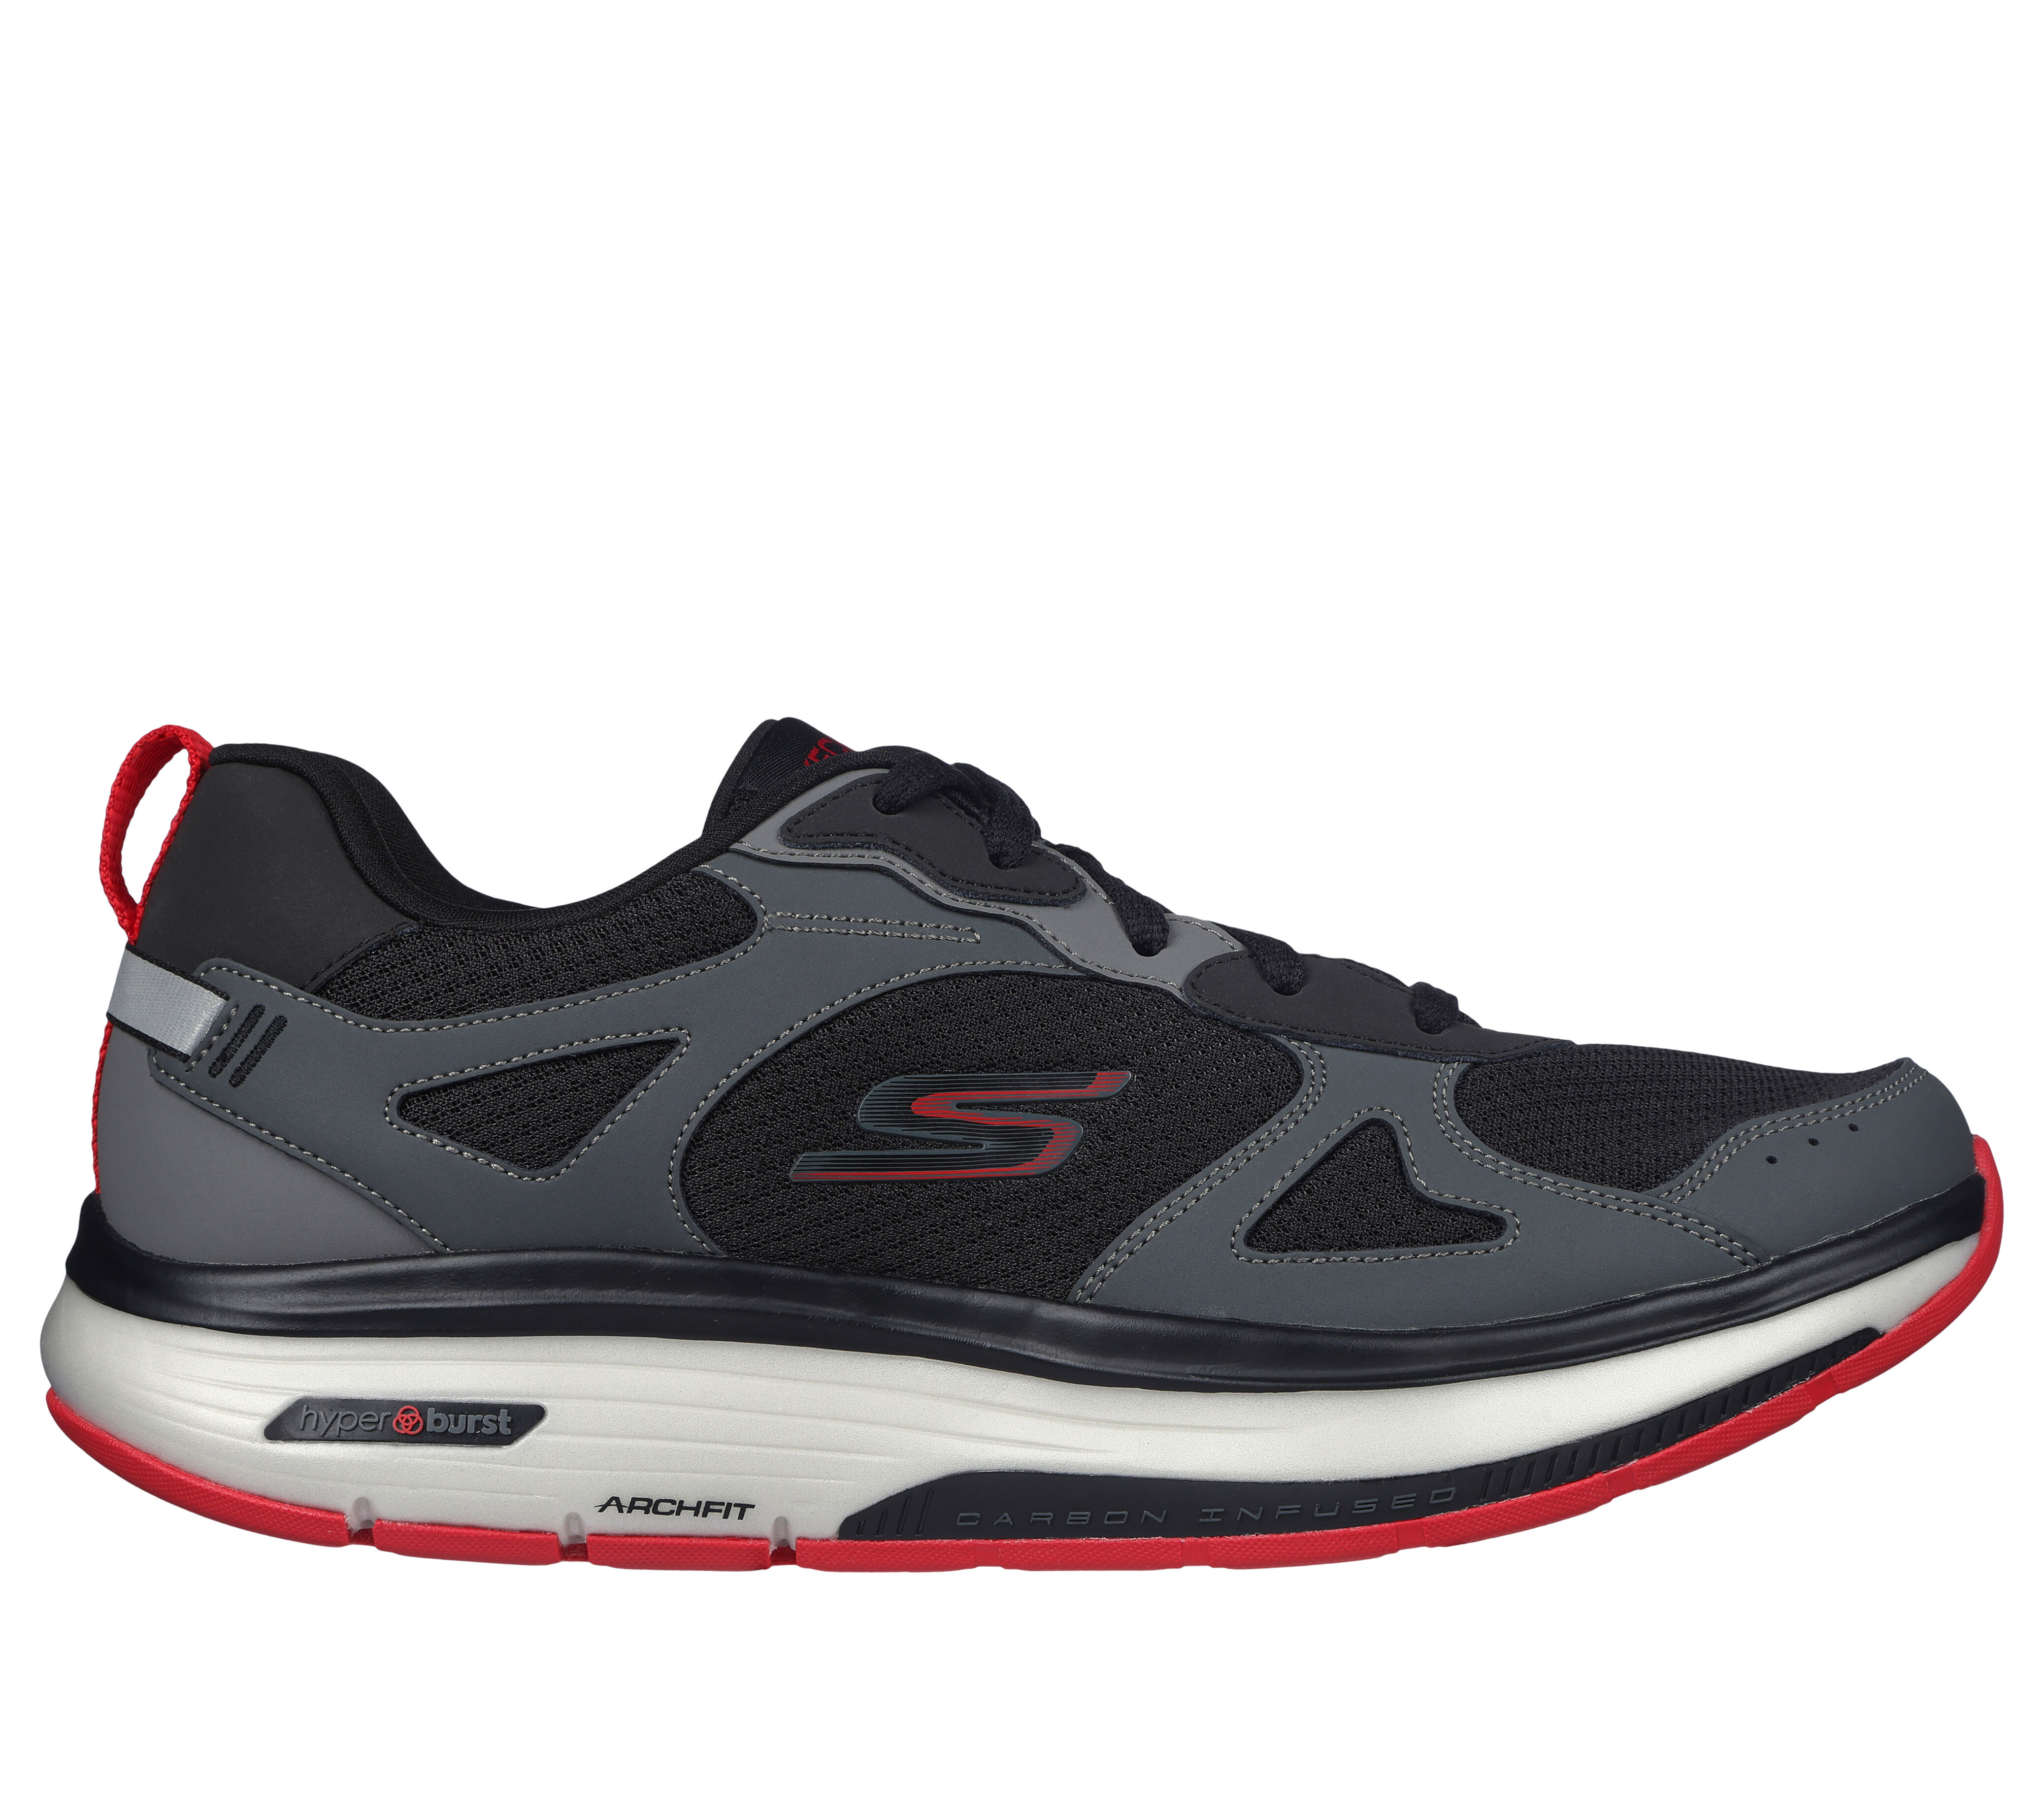 skechers shoes price in india